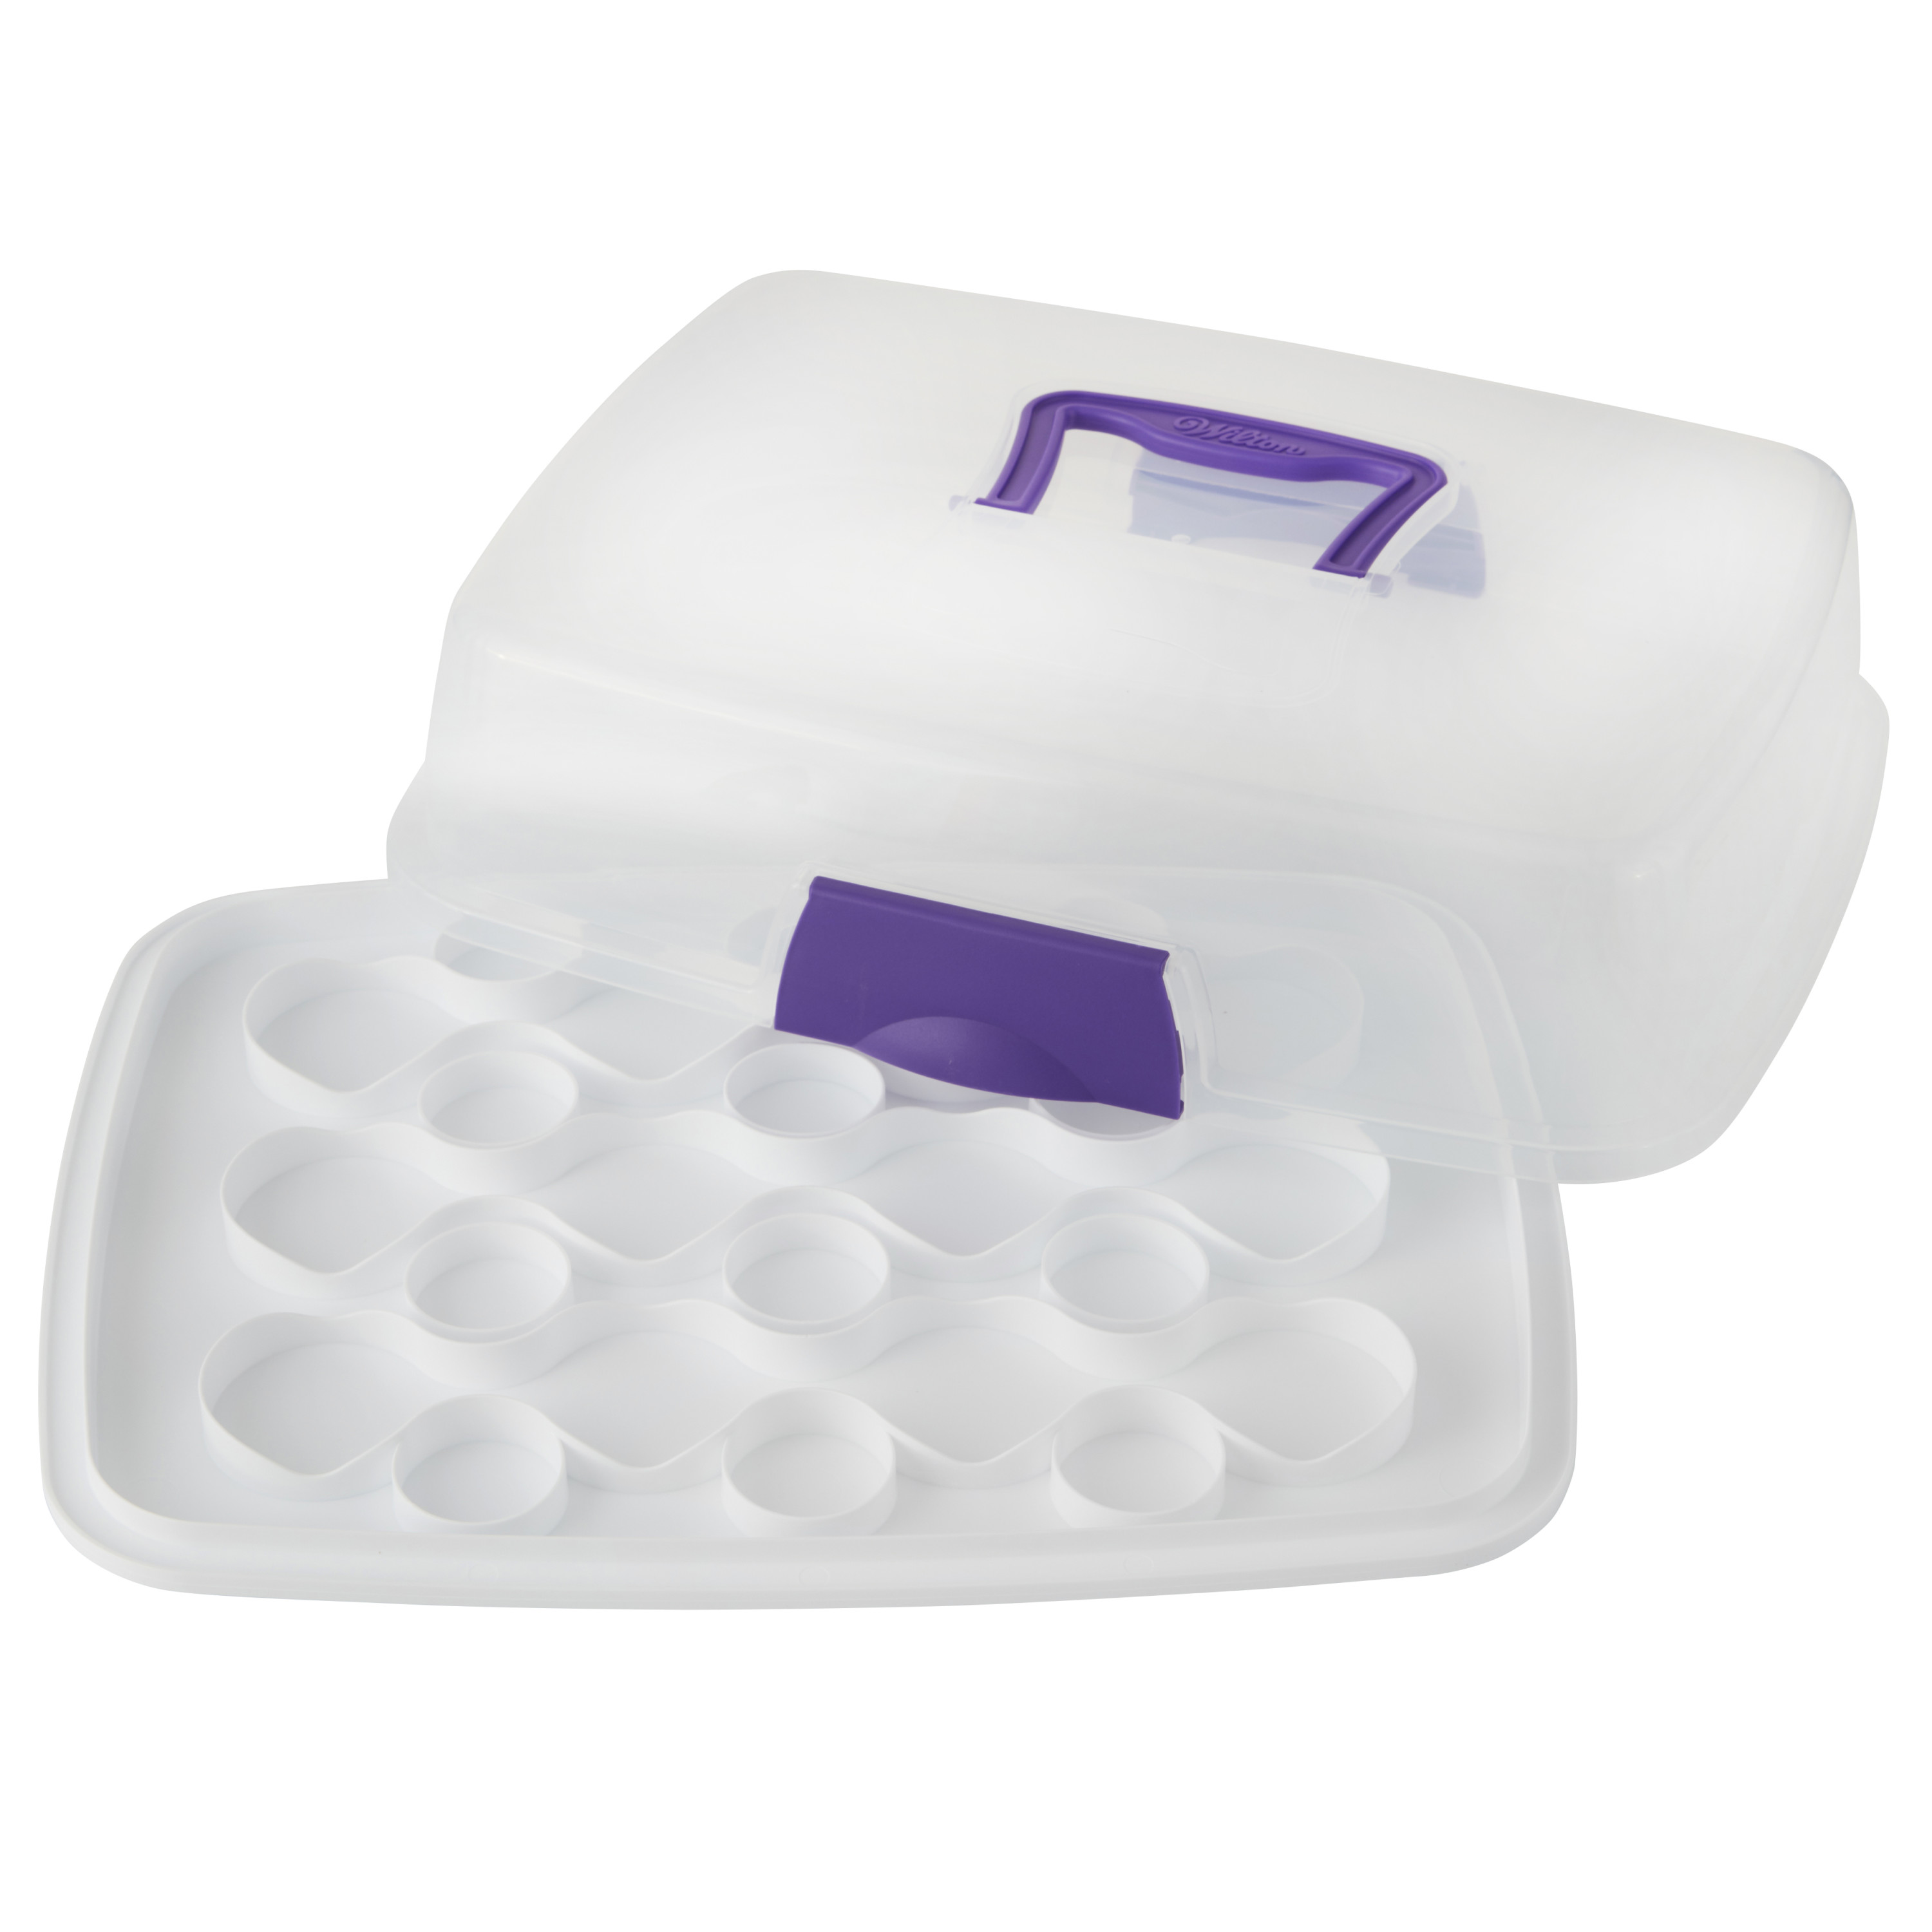 Wilton Oblong Cake and Cupcake Carrier, Practical Cupcake Container, Plastic - image 3 of 11